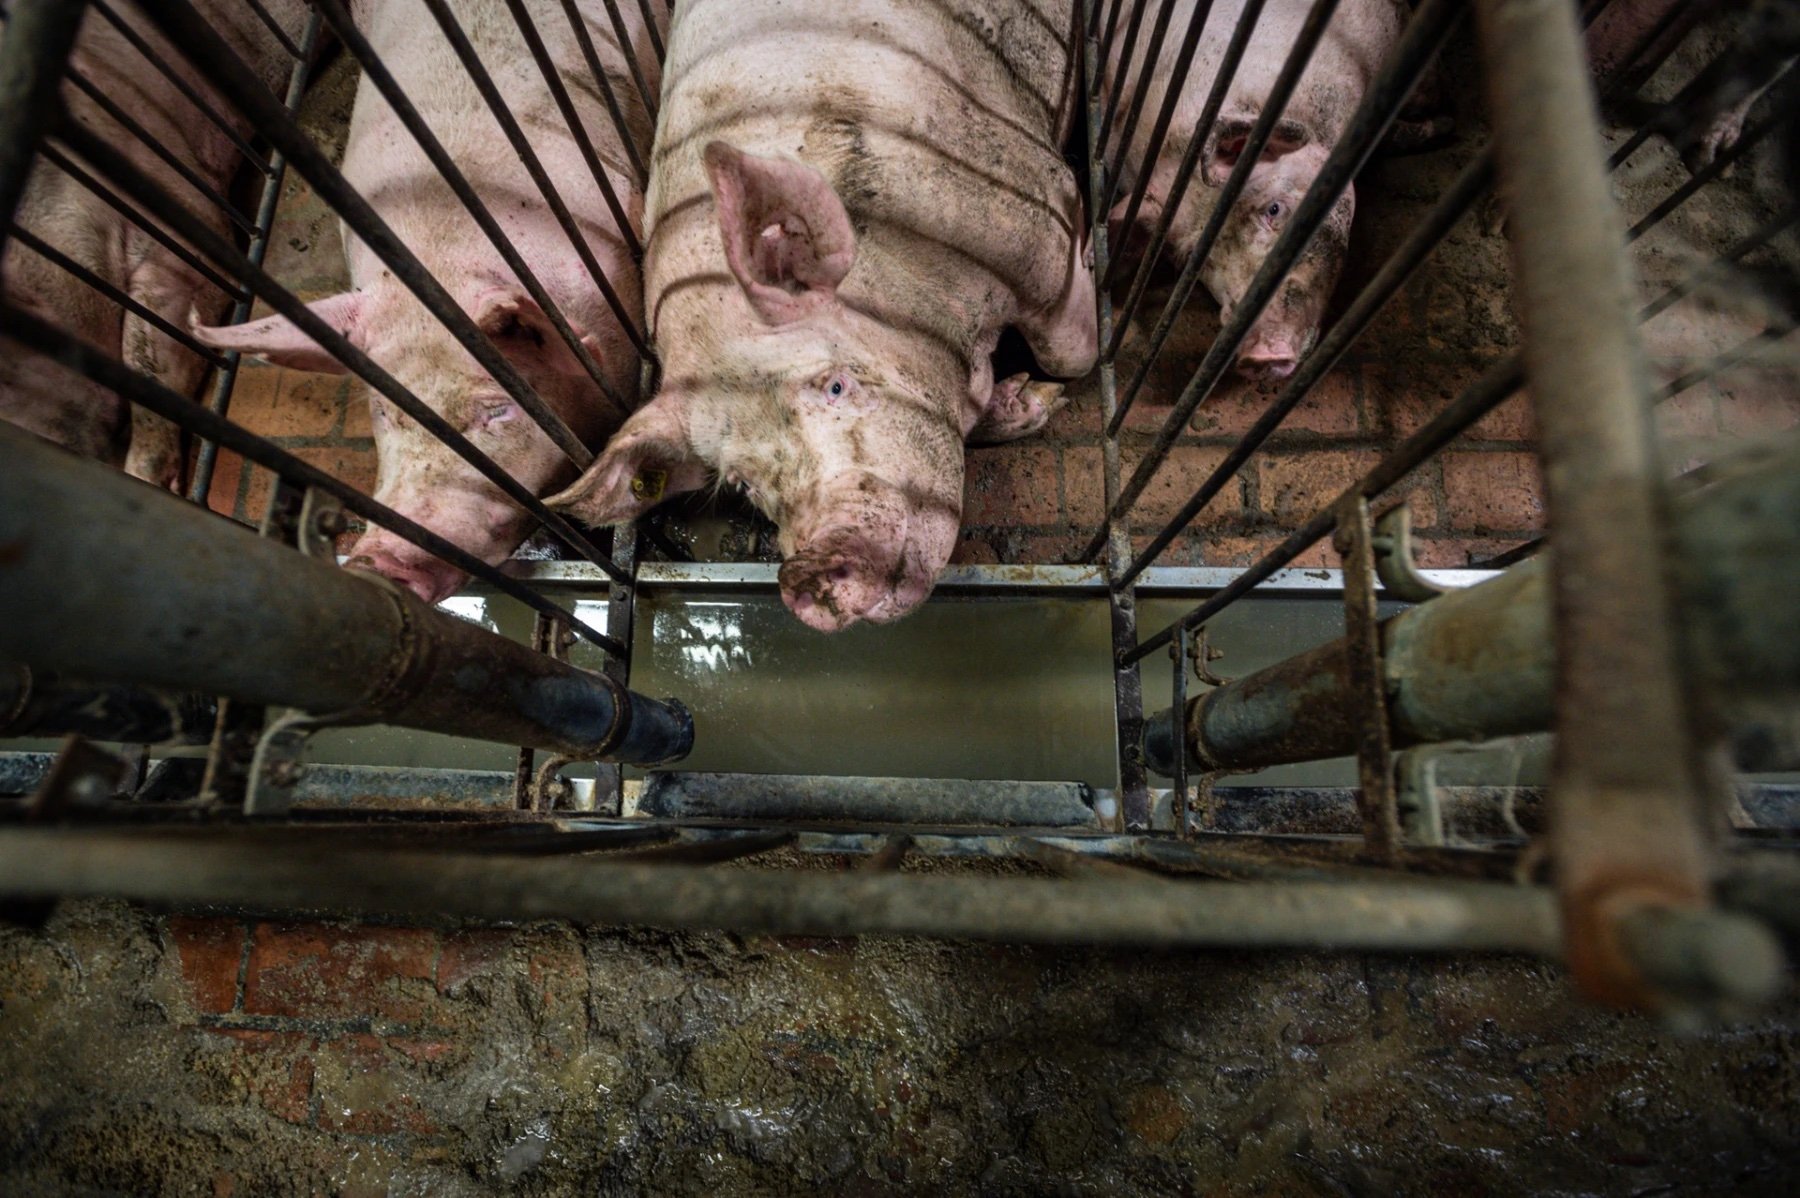 The realities of industrial farming: pigs in cramped conditions - Dyrenes Alliance works tirelessly to promote animal rights and combat the critical conditions in industrial farming. Support our efforts to ensure a dignified life for all animals.